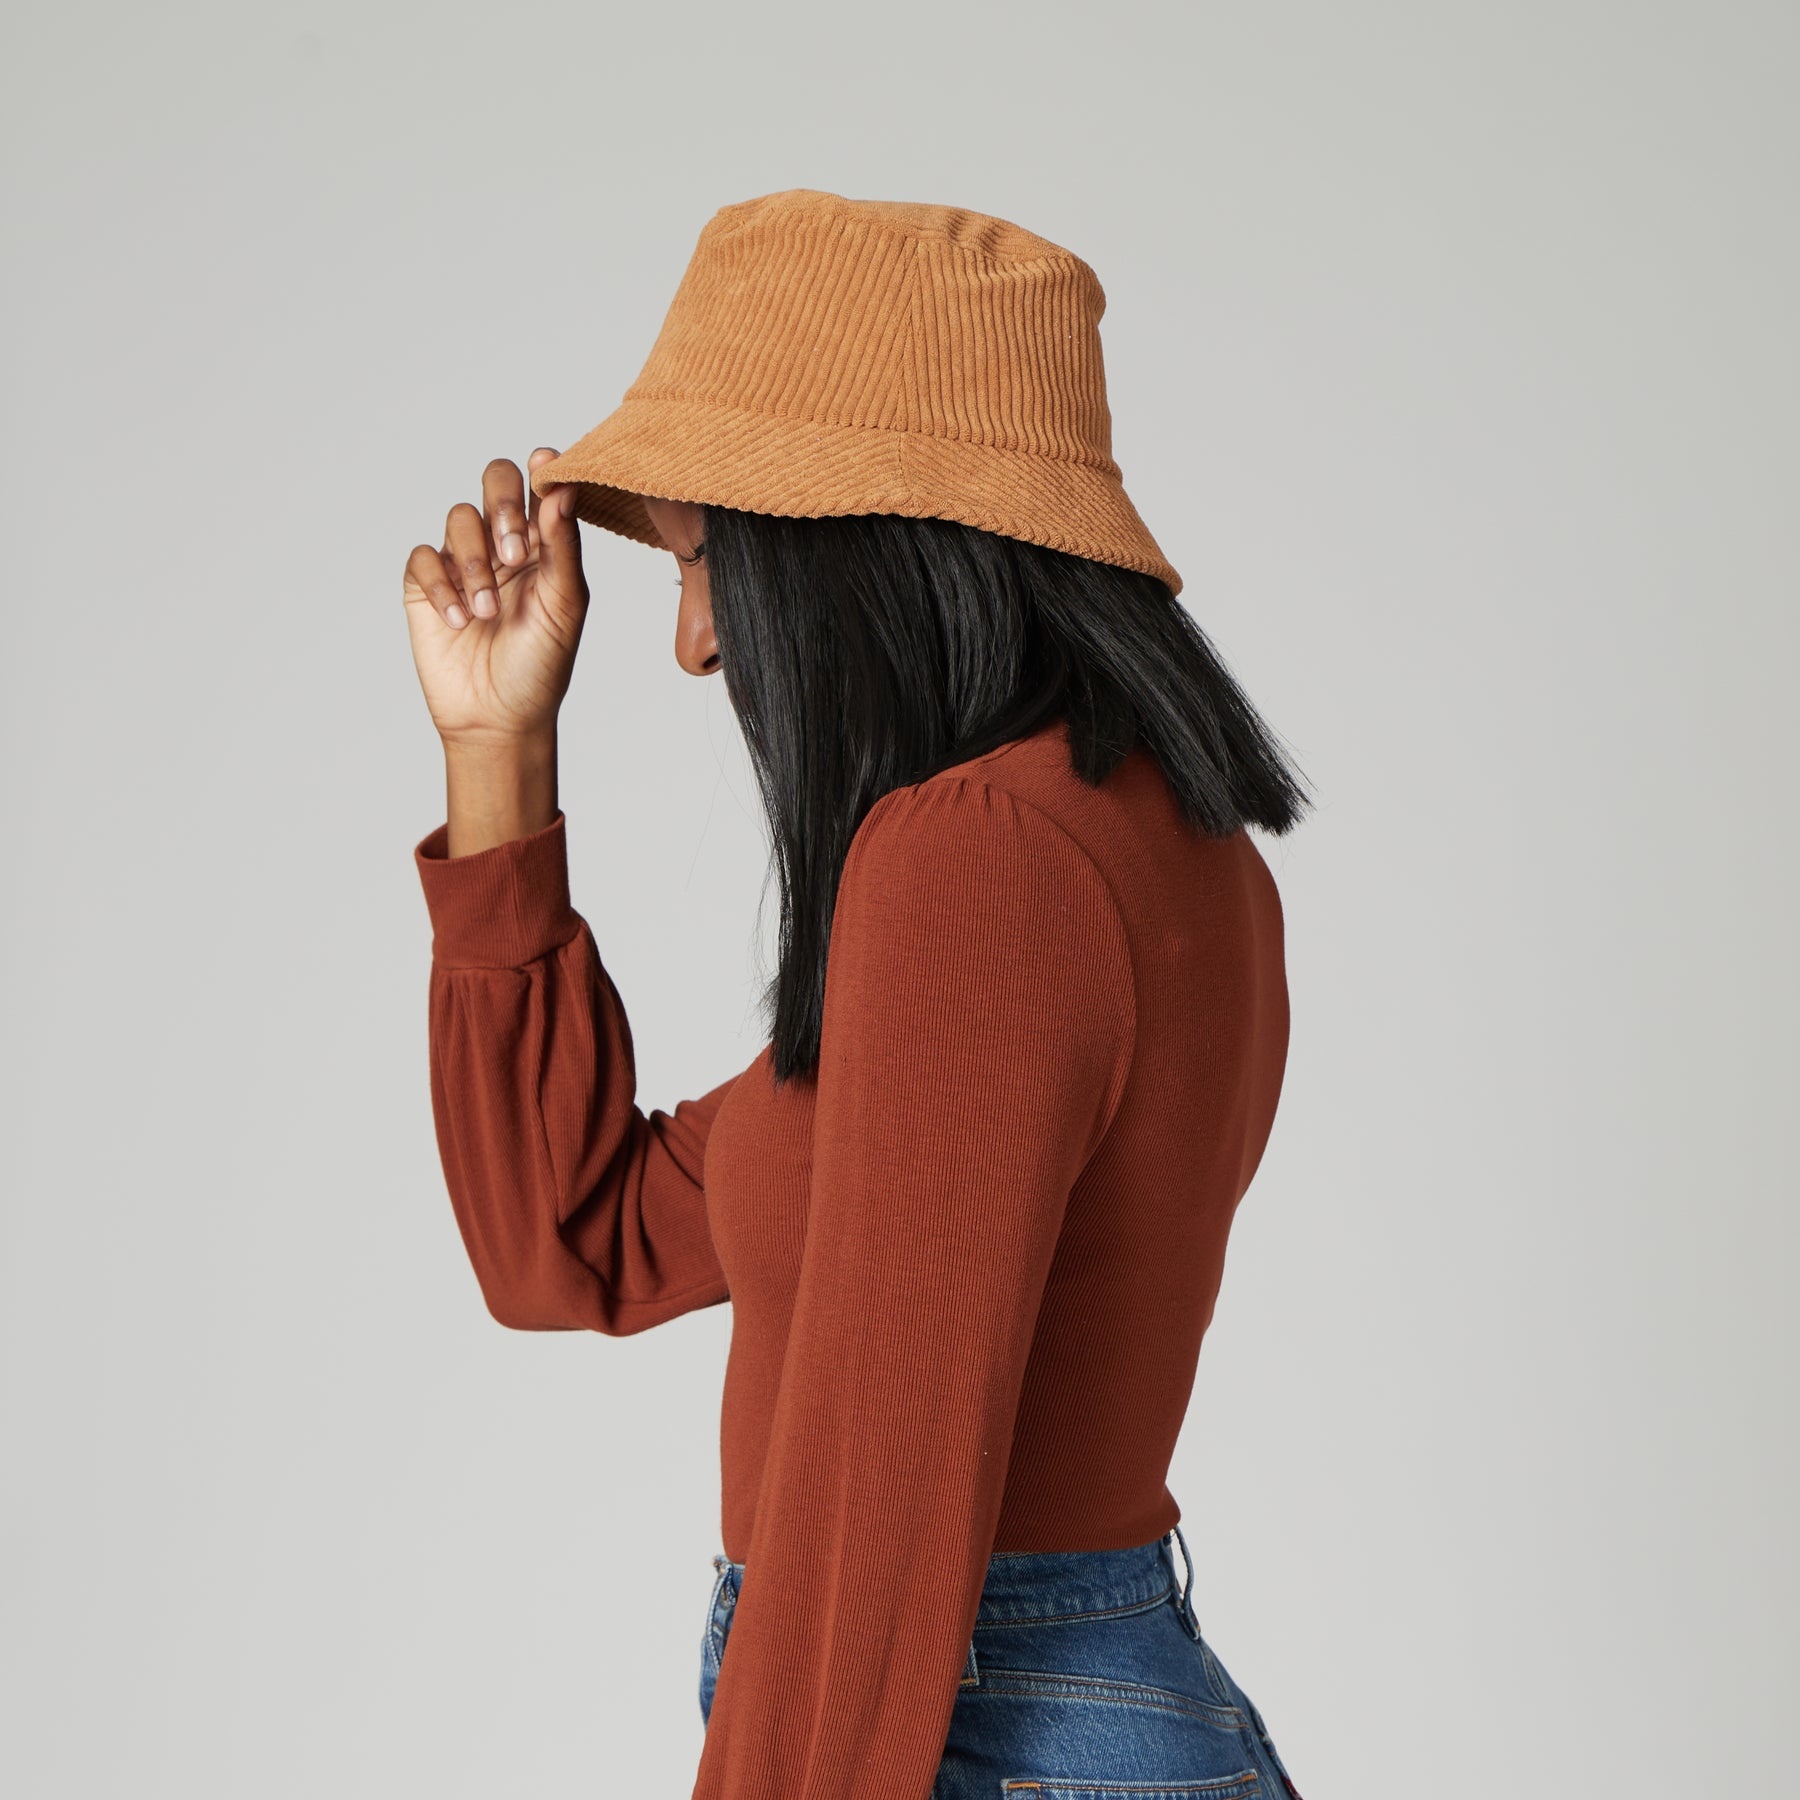 Pepin Bucket Hat in Caramel : San Diego Hat Company - Exit9 Gift